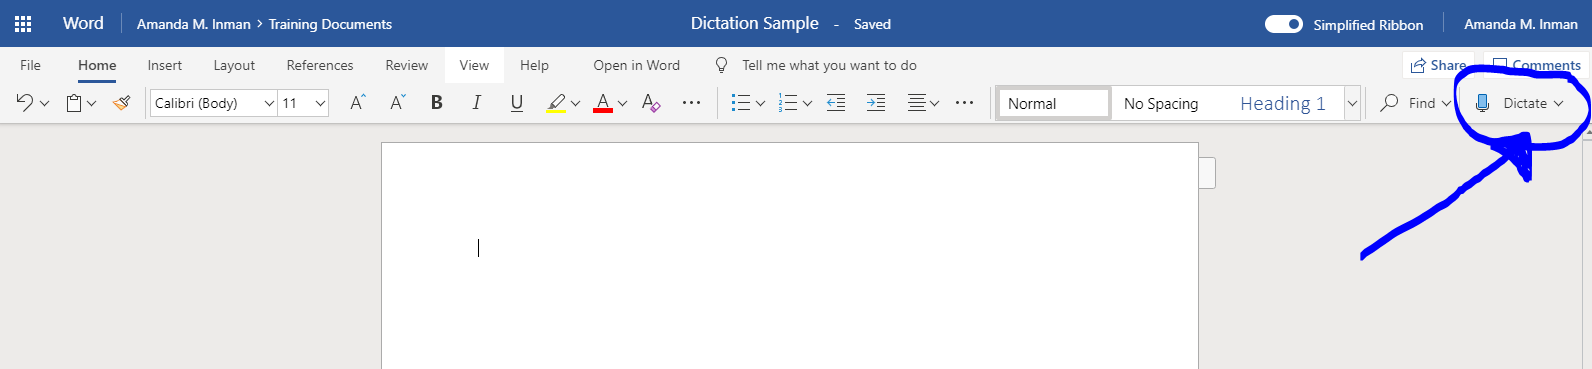 Screen shot of the Microsoft Word Home toolbar with Dictate icon circled in blue with blue arrow pointing to it.